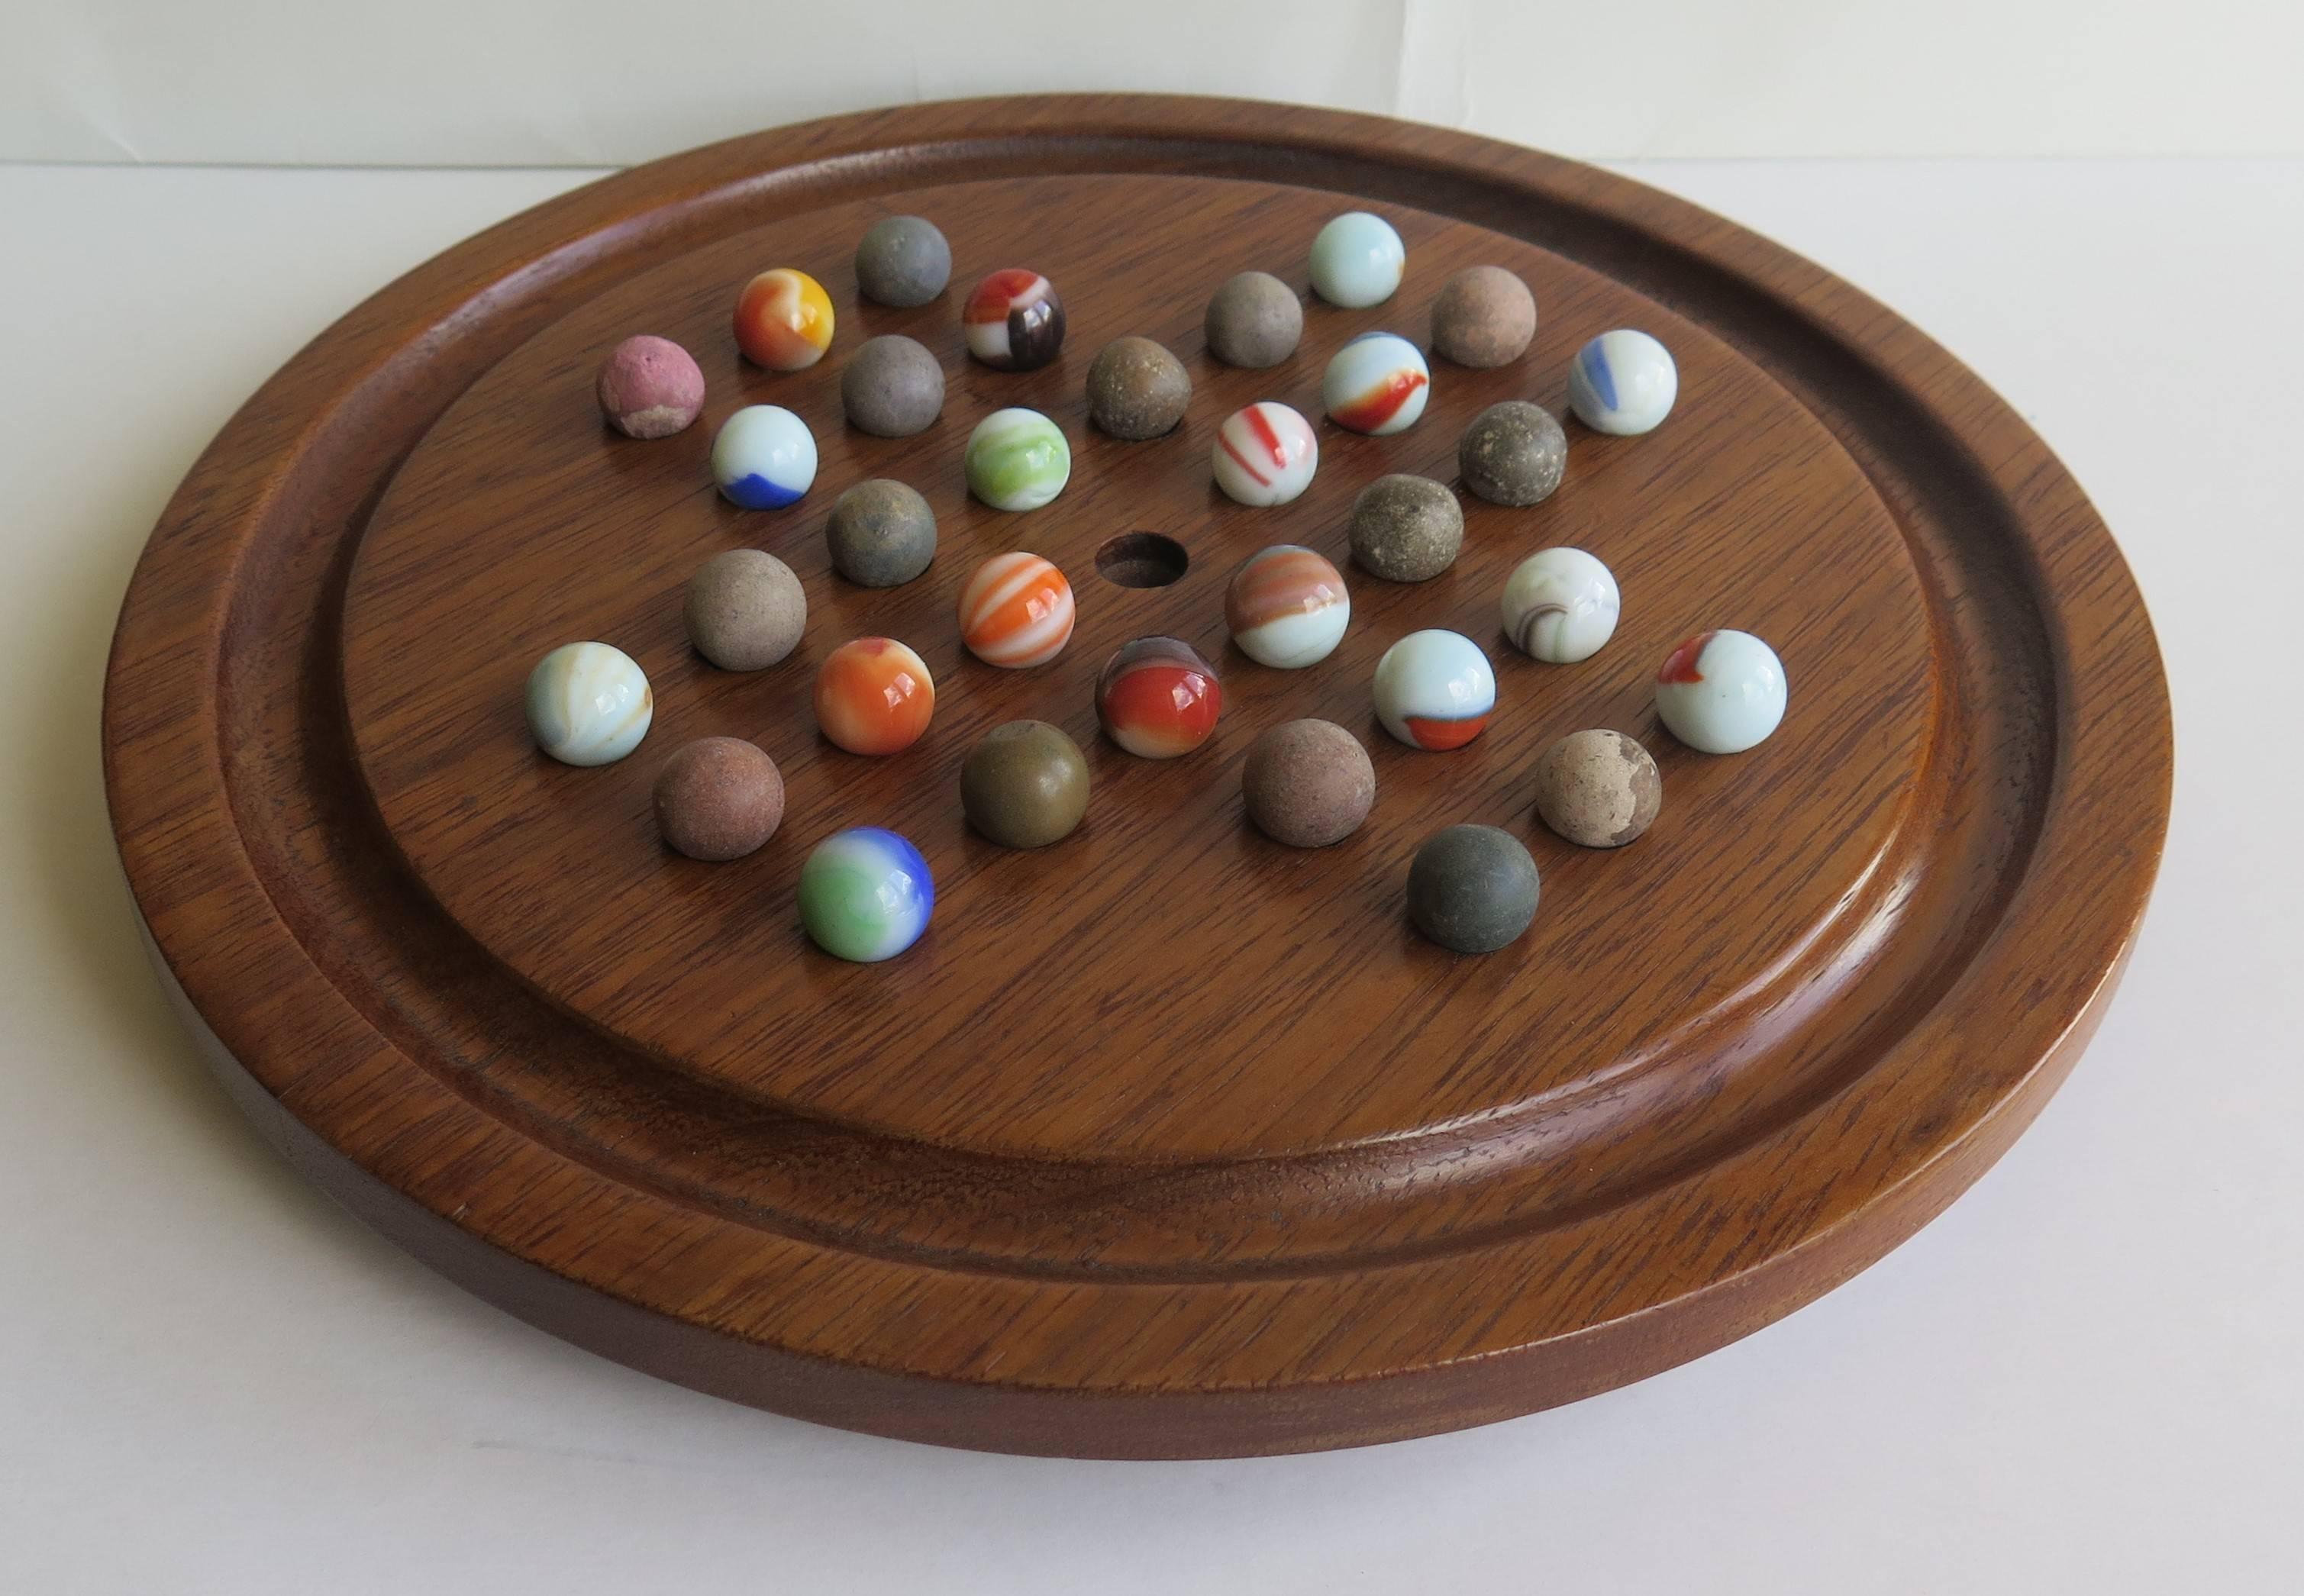 Ceramic 19th Century Table Marble Solitaire Board Game, Early Handmade Marbles